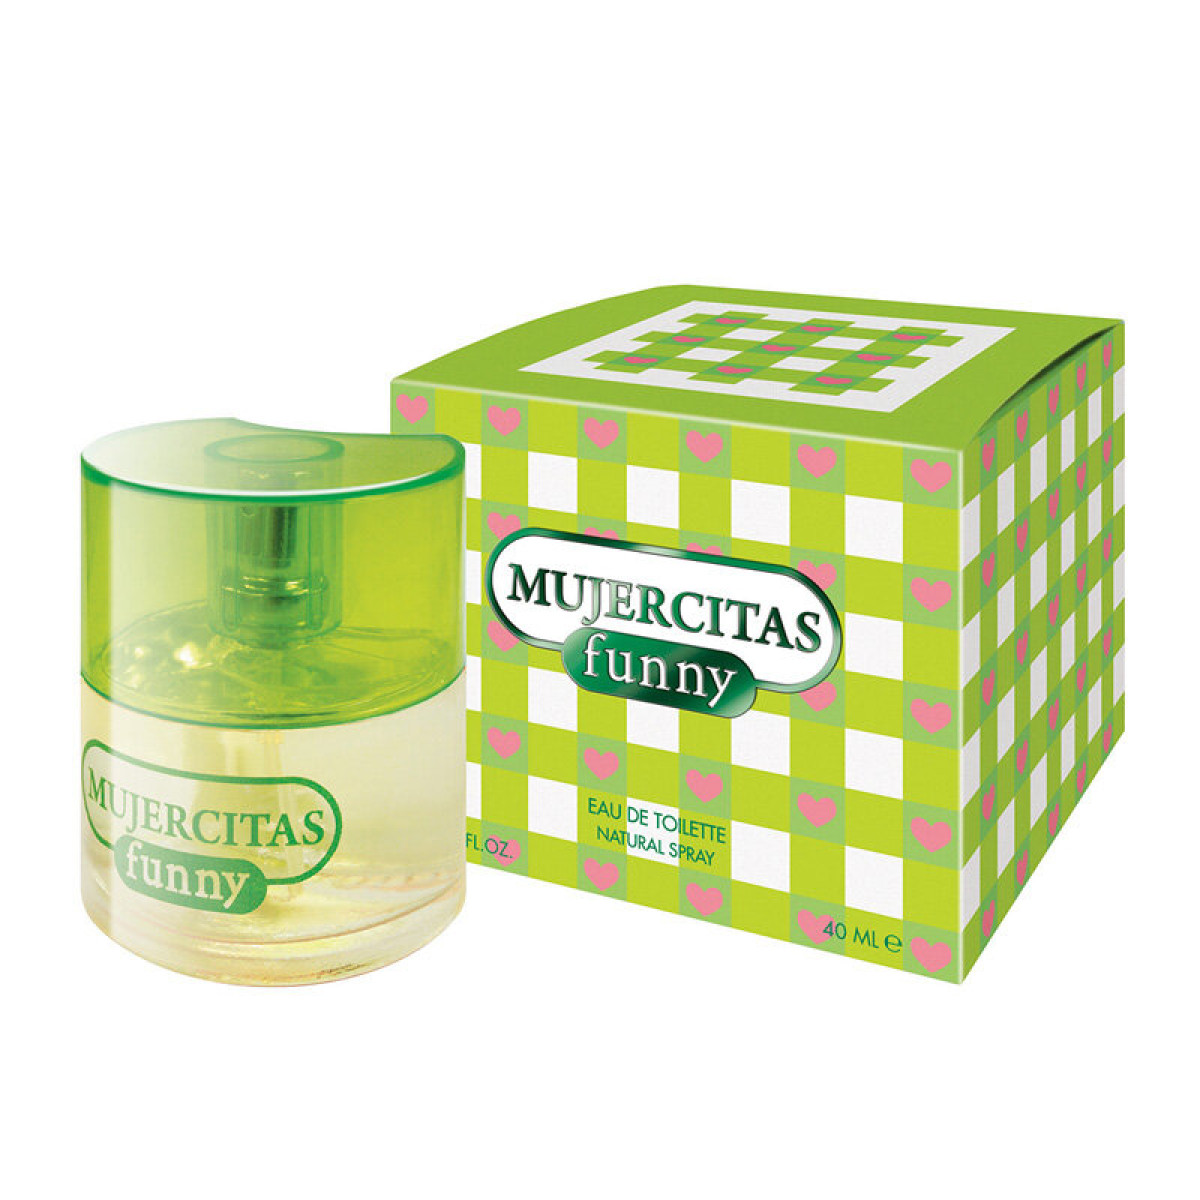 MUJERCITAS FUNNY EDT 40 ML 2743